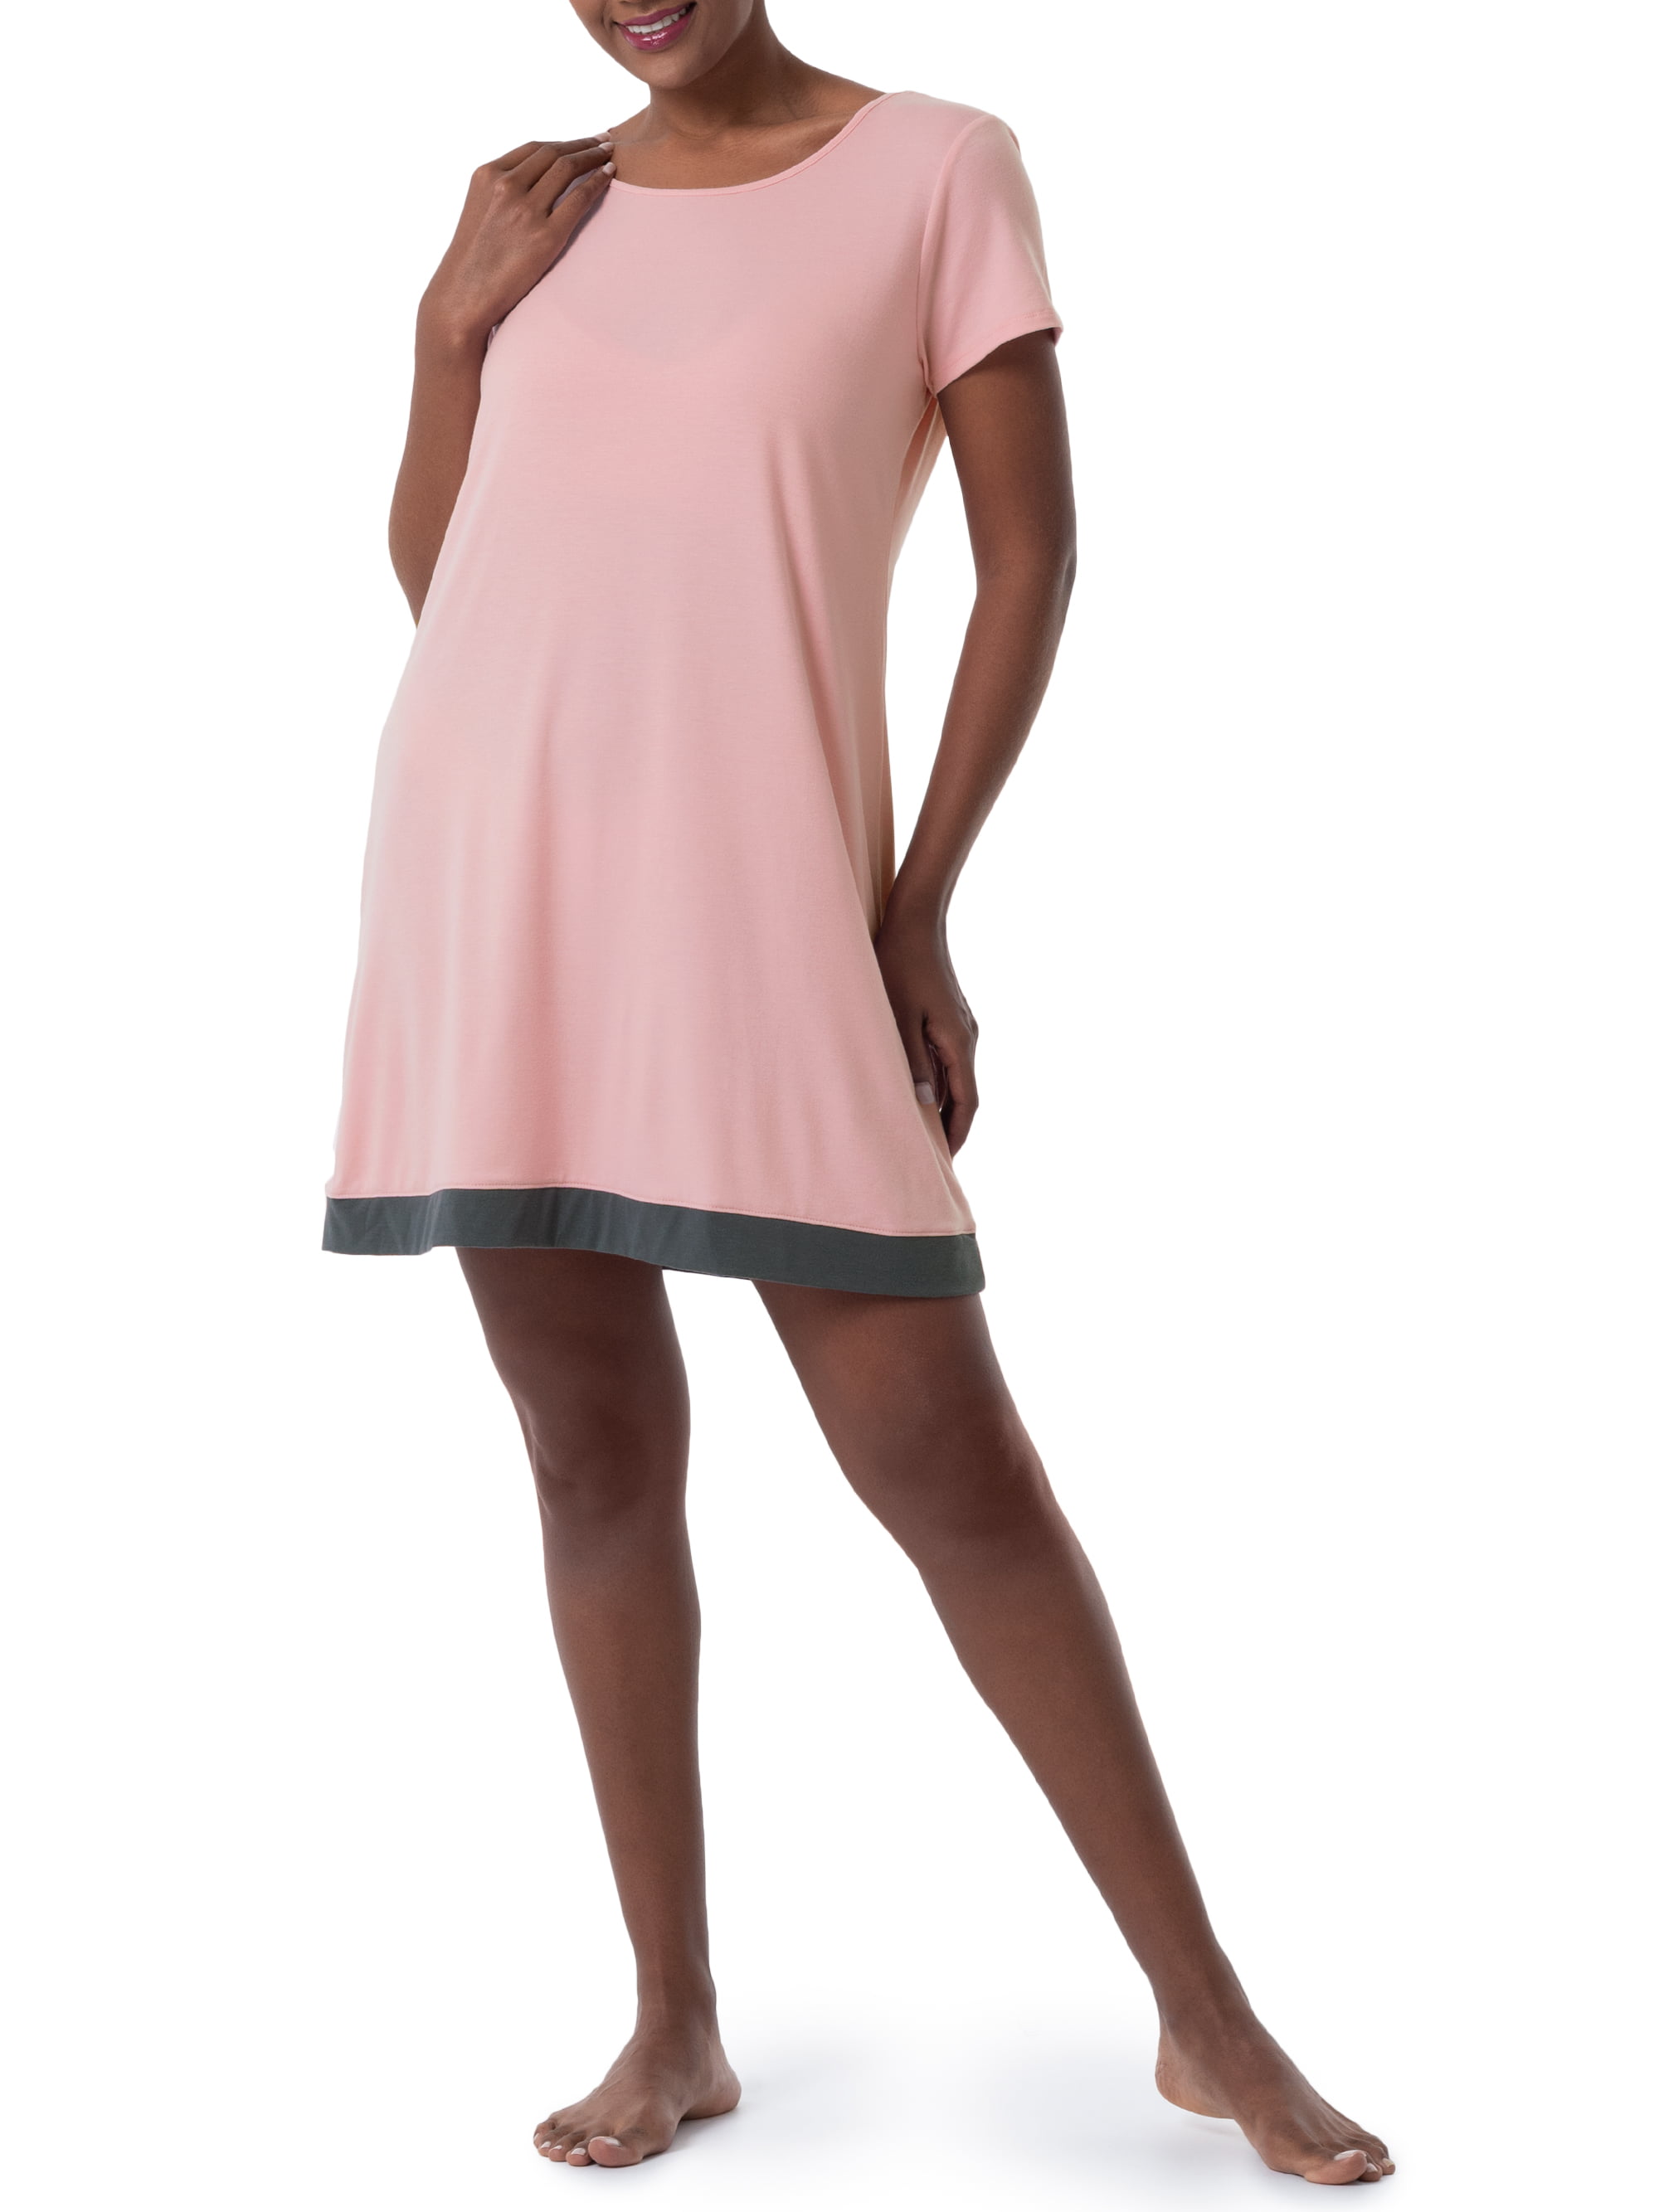 Fruit of the Loom Womens Super Soft and Breathable Sleep Shirt